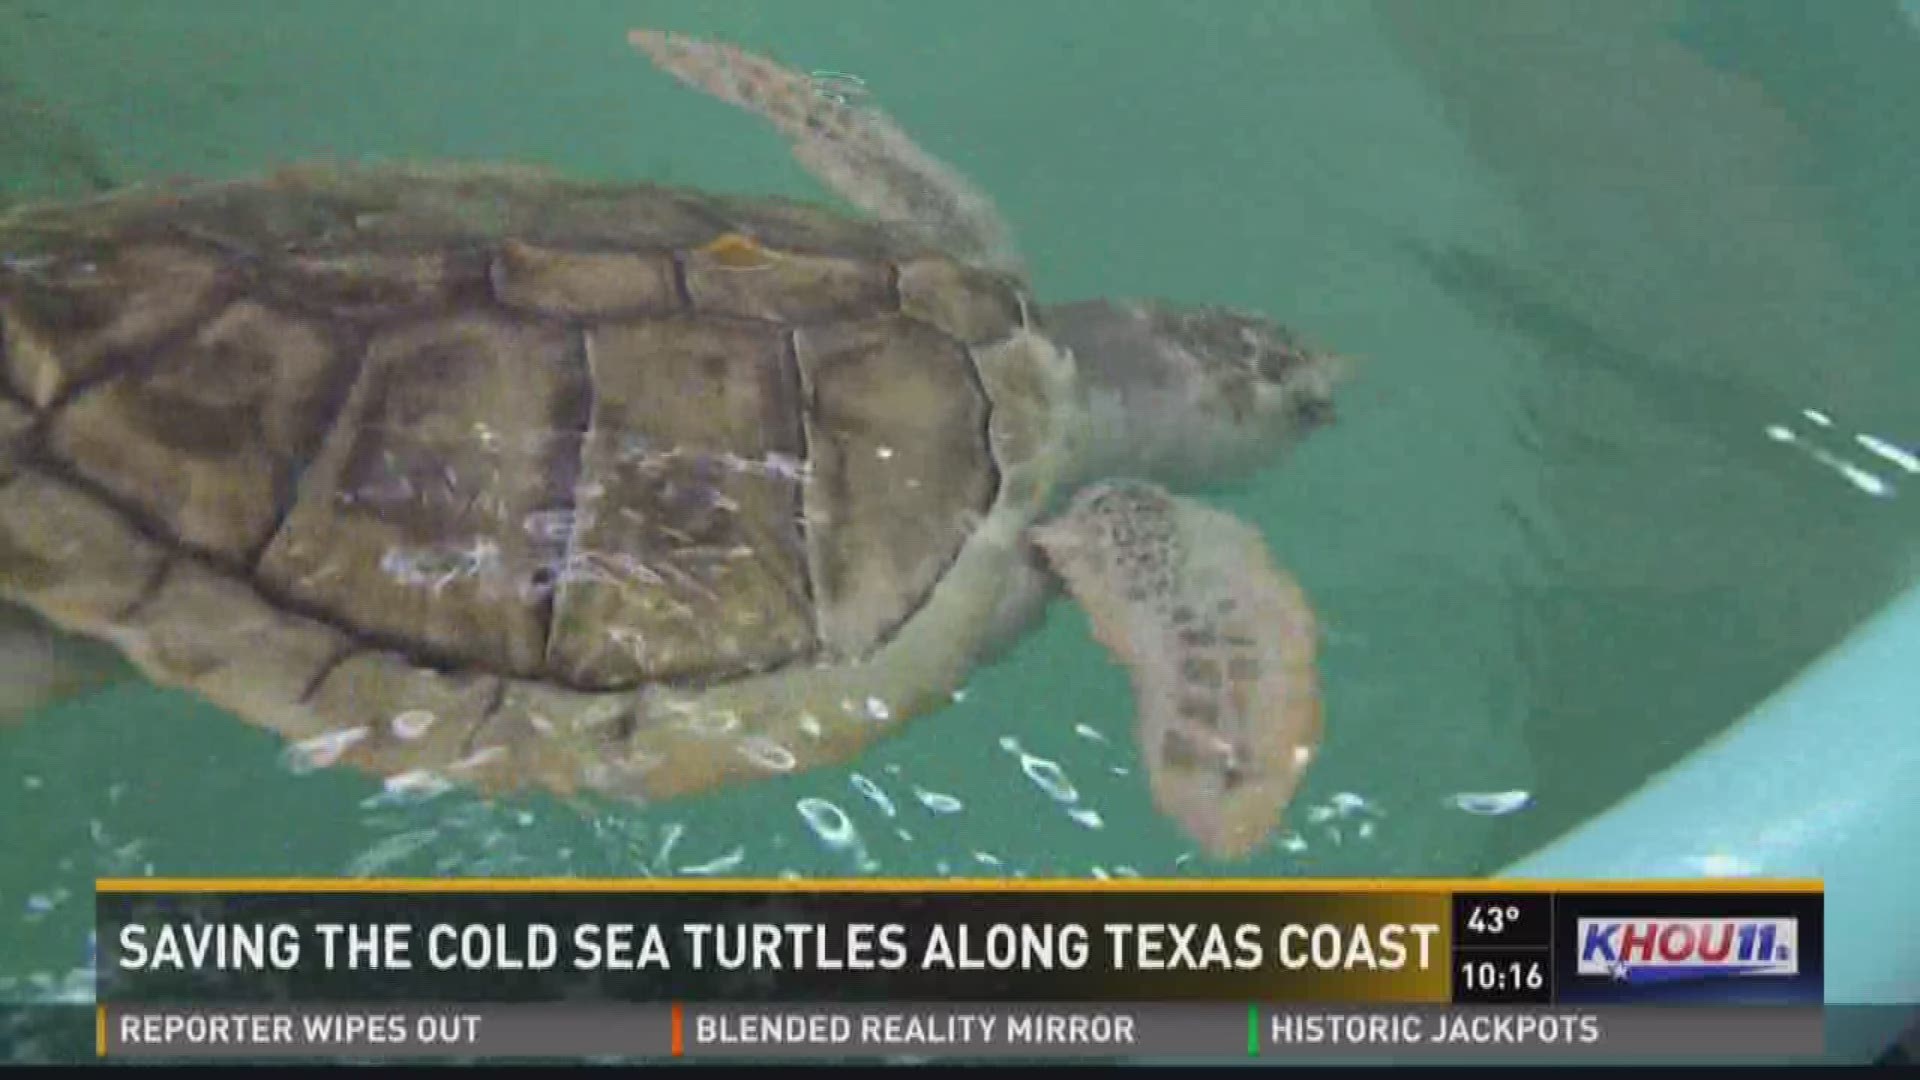 A huge effort is underway along the Texas coast to save sea turtles from the bitterly cold weather.